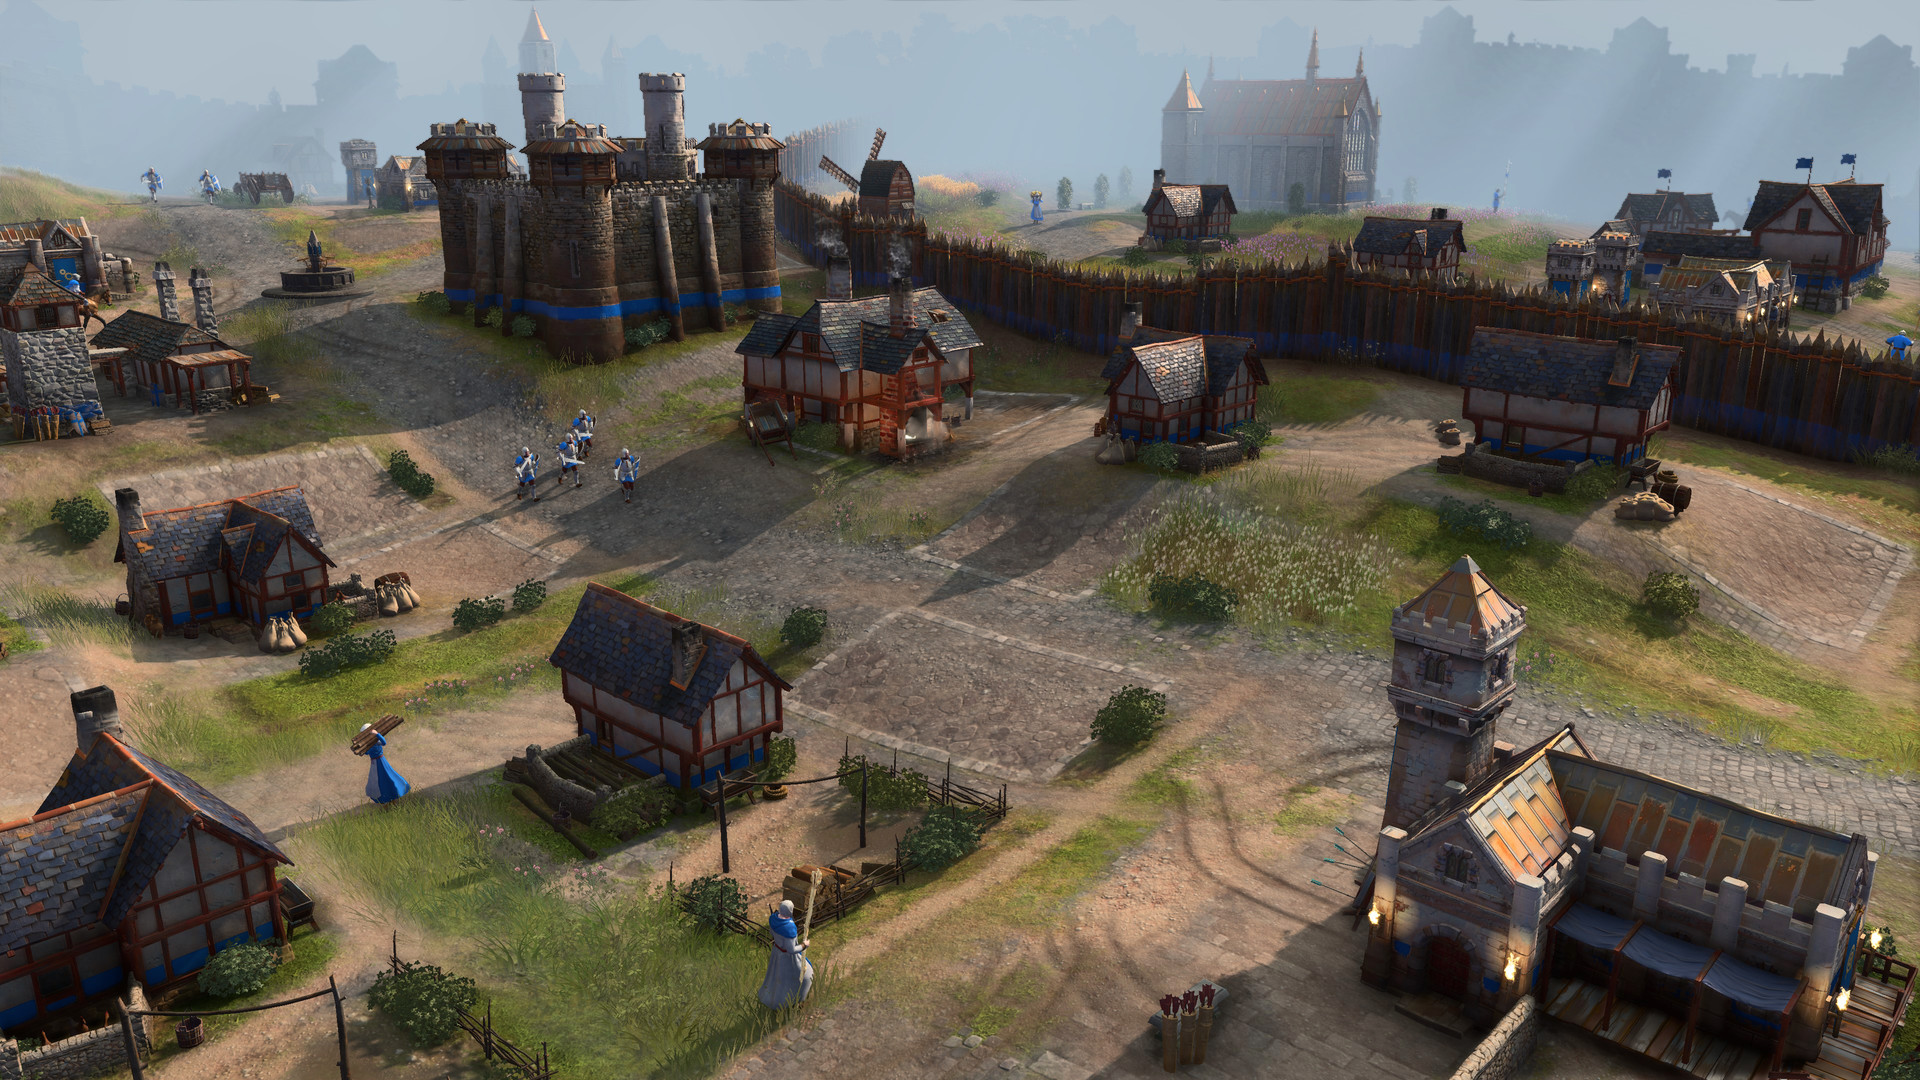 Age of Empires IV Launches Fall 2021 – First Civilizations, Gameplay, and Campaign Details Revealed